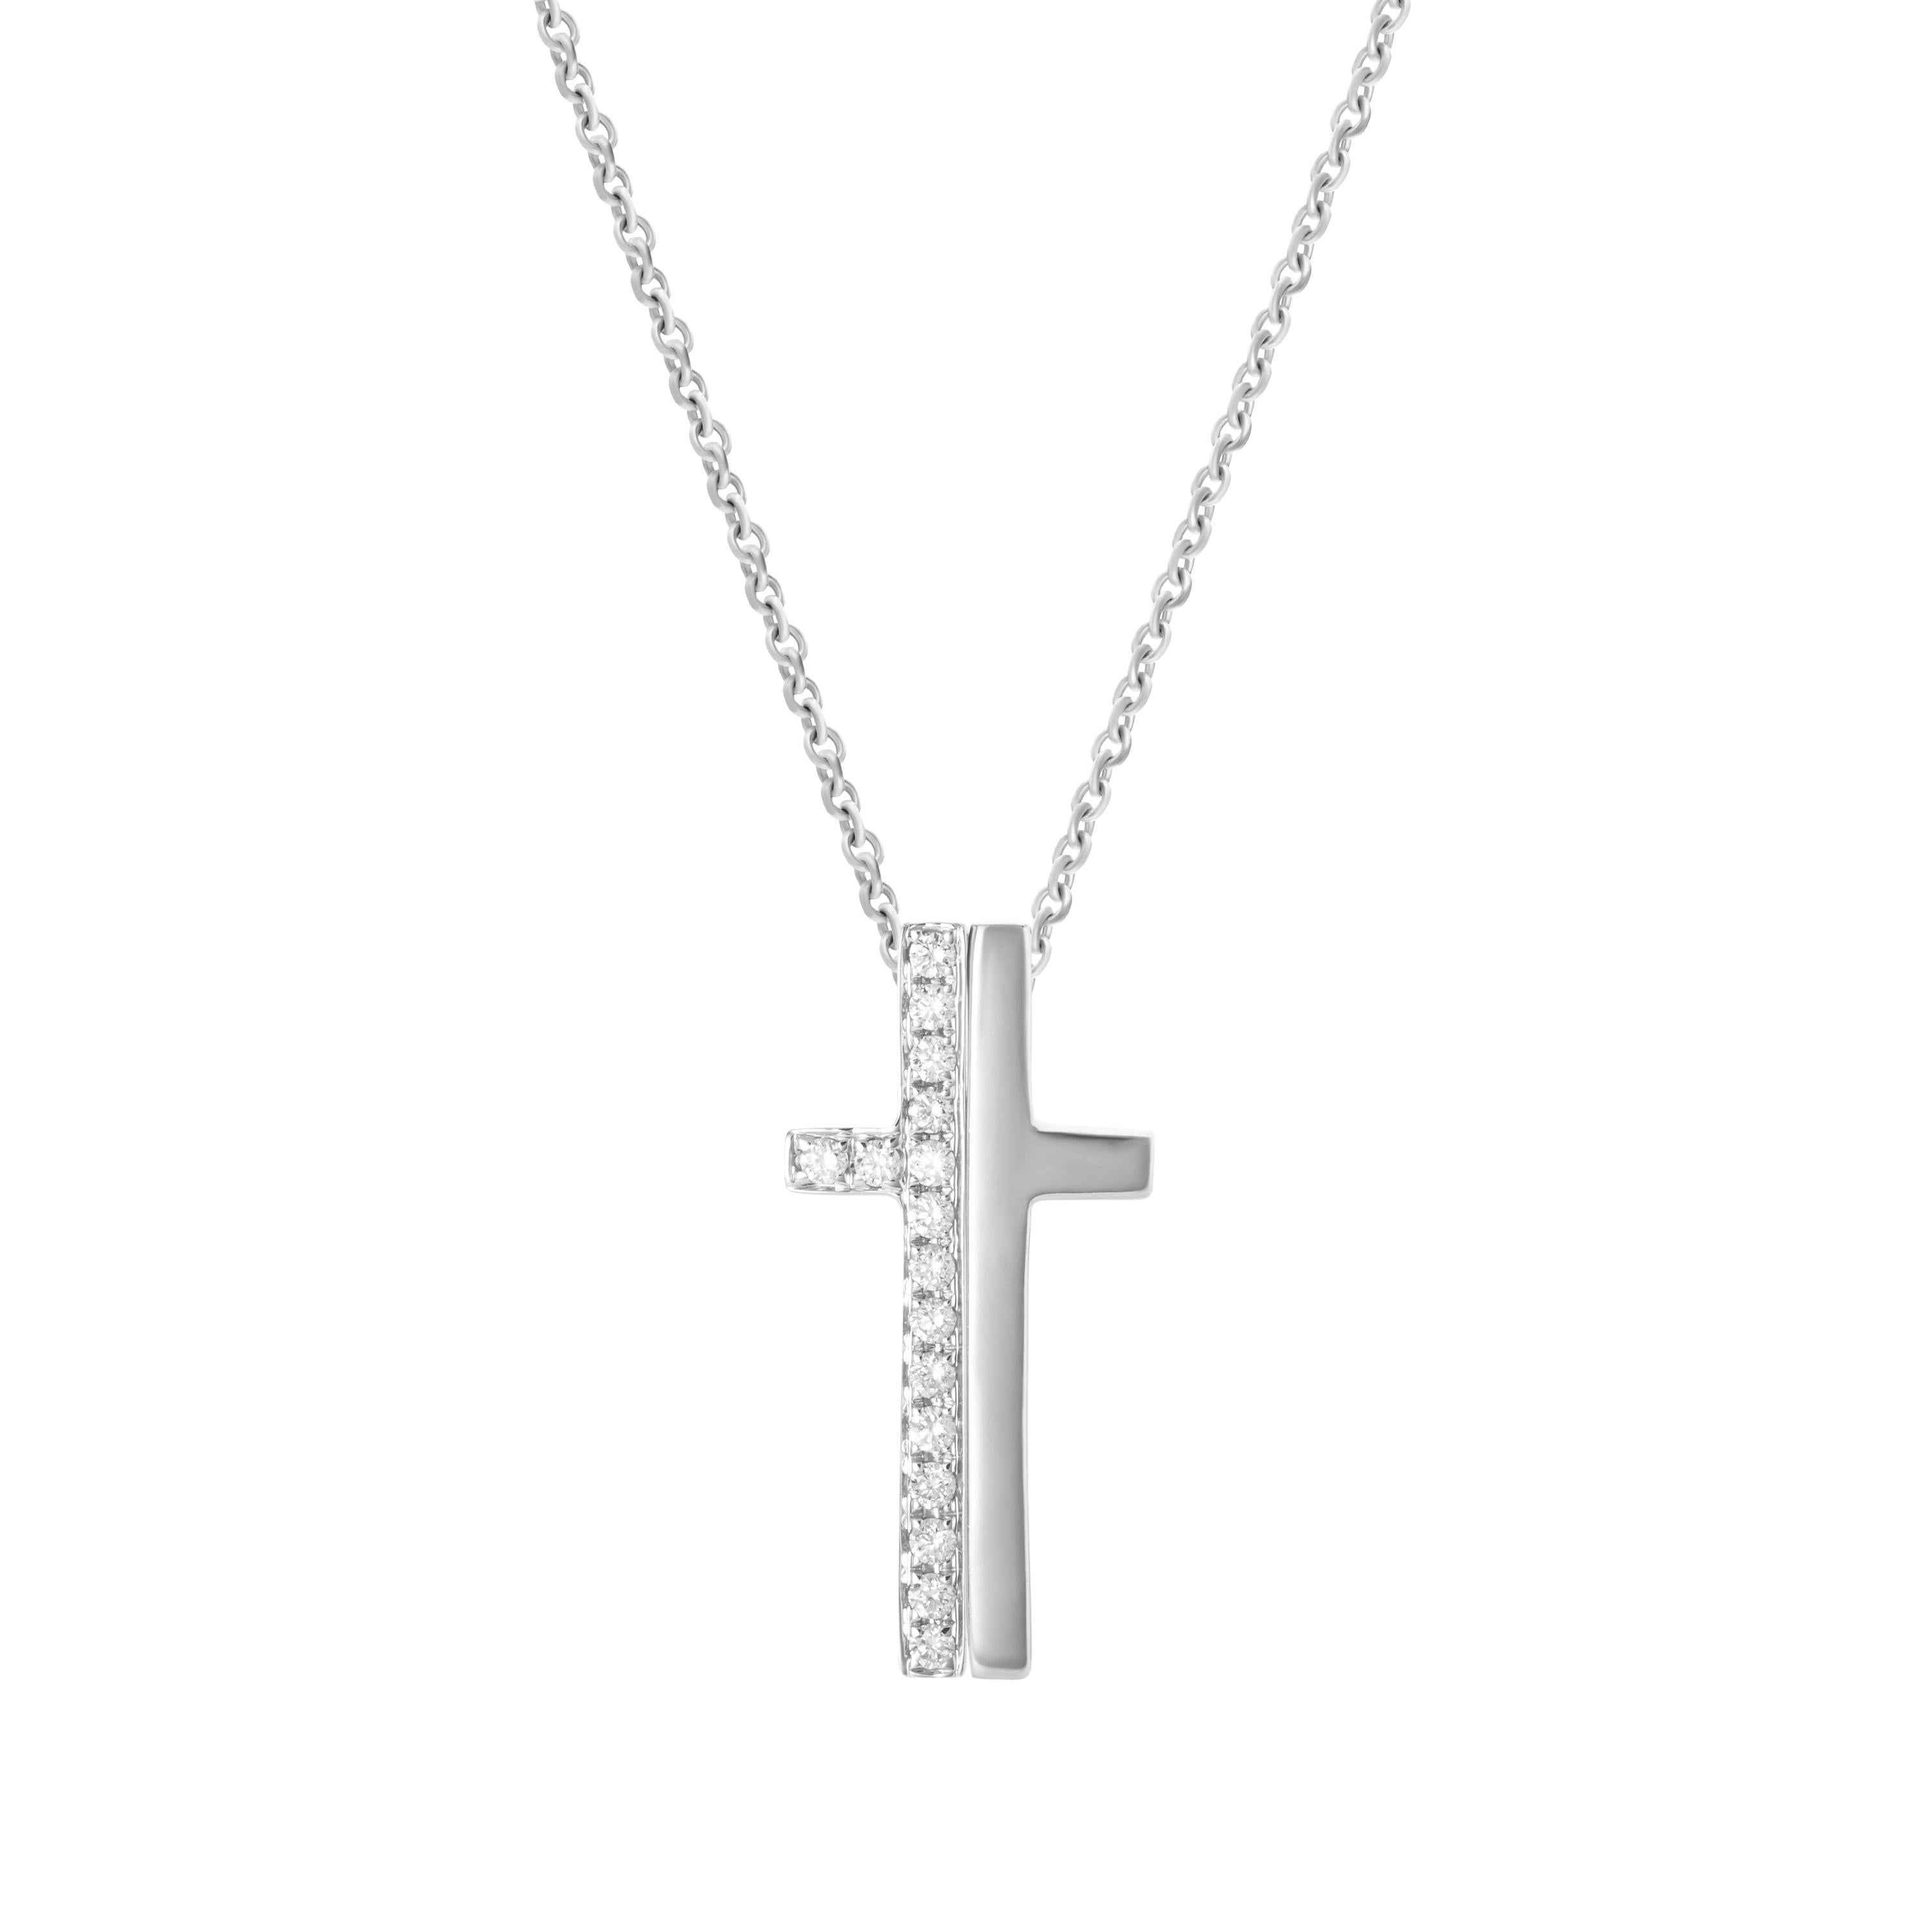 18-karat white gold necklace features a split cross - one side in solid gold, the other accented by 0.21 carats of round brilliant cut diamonds.  Chain length 18 inches.  Pendant height 2.5cm, pendant width 1.3cm. 

Composition:
18K White Gold
16